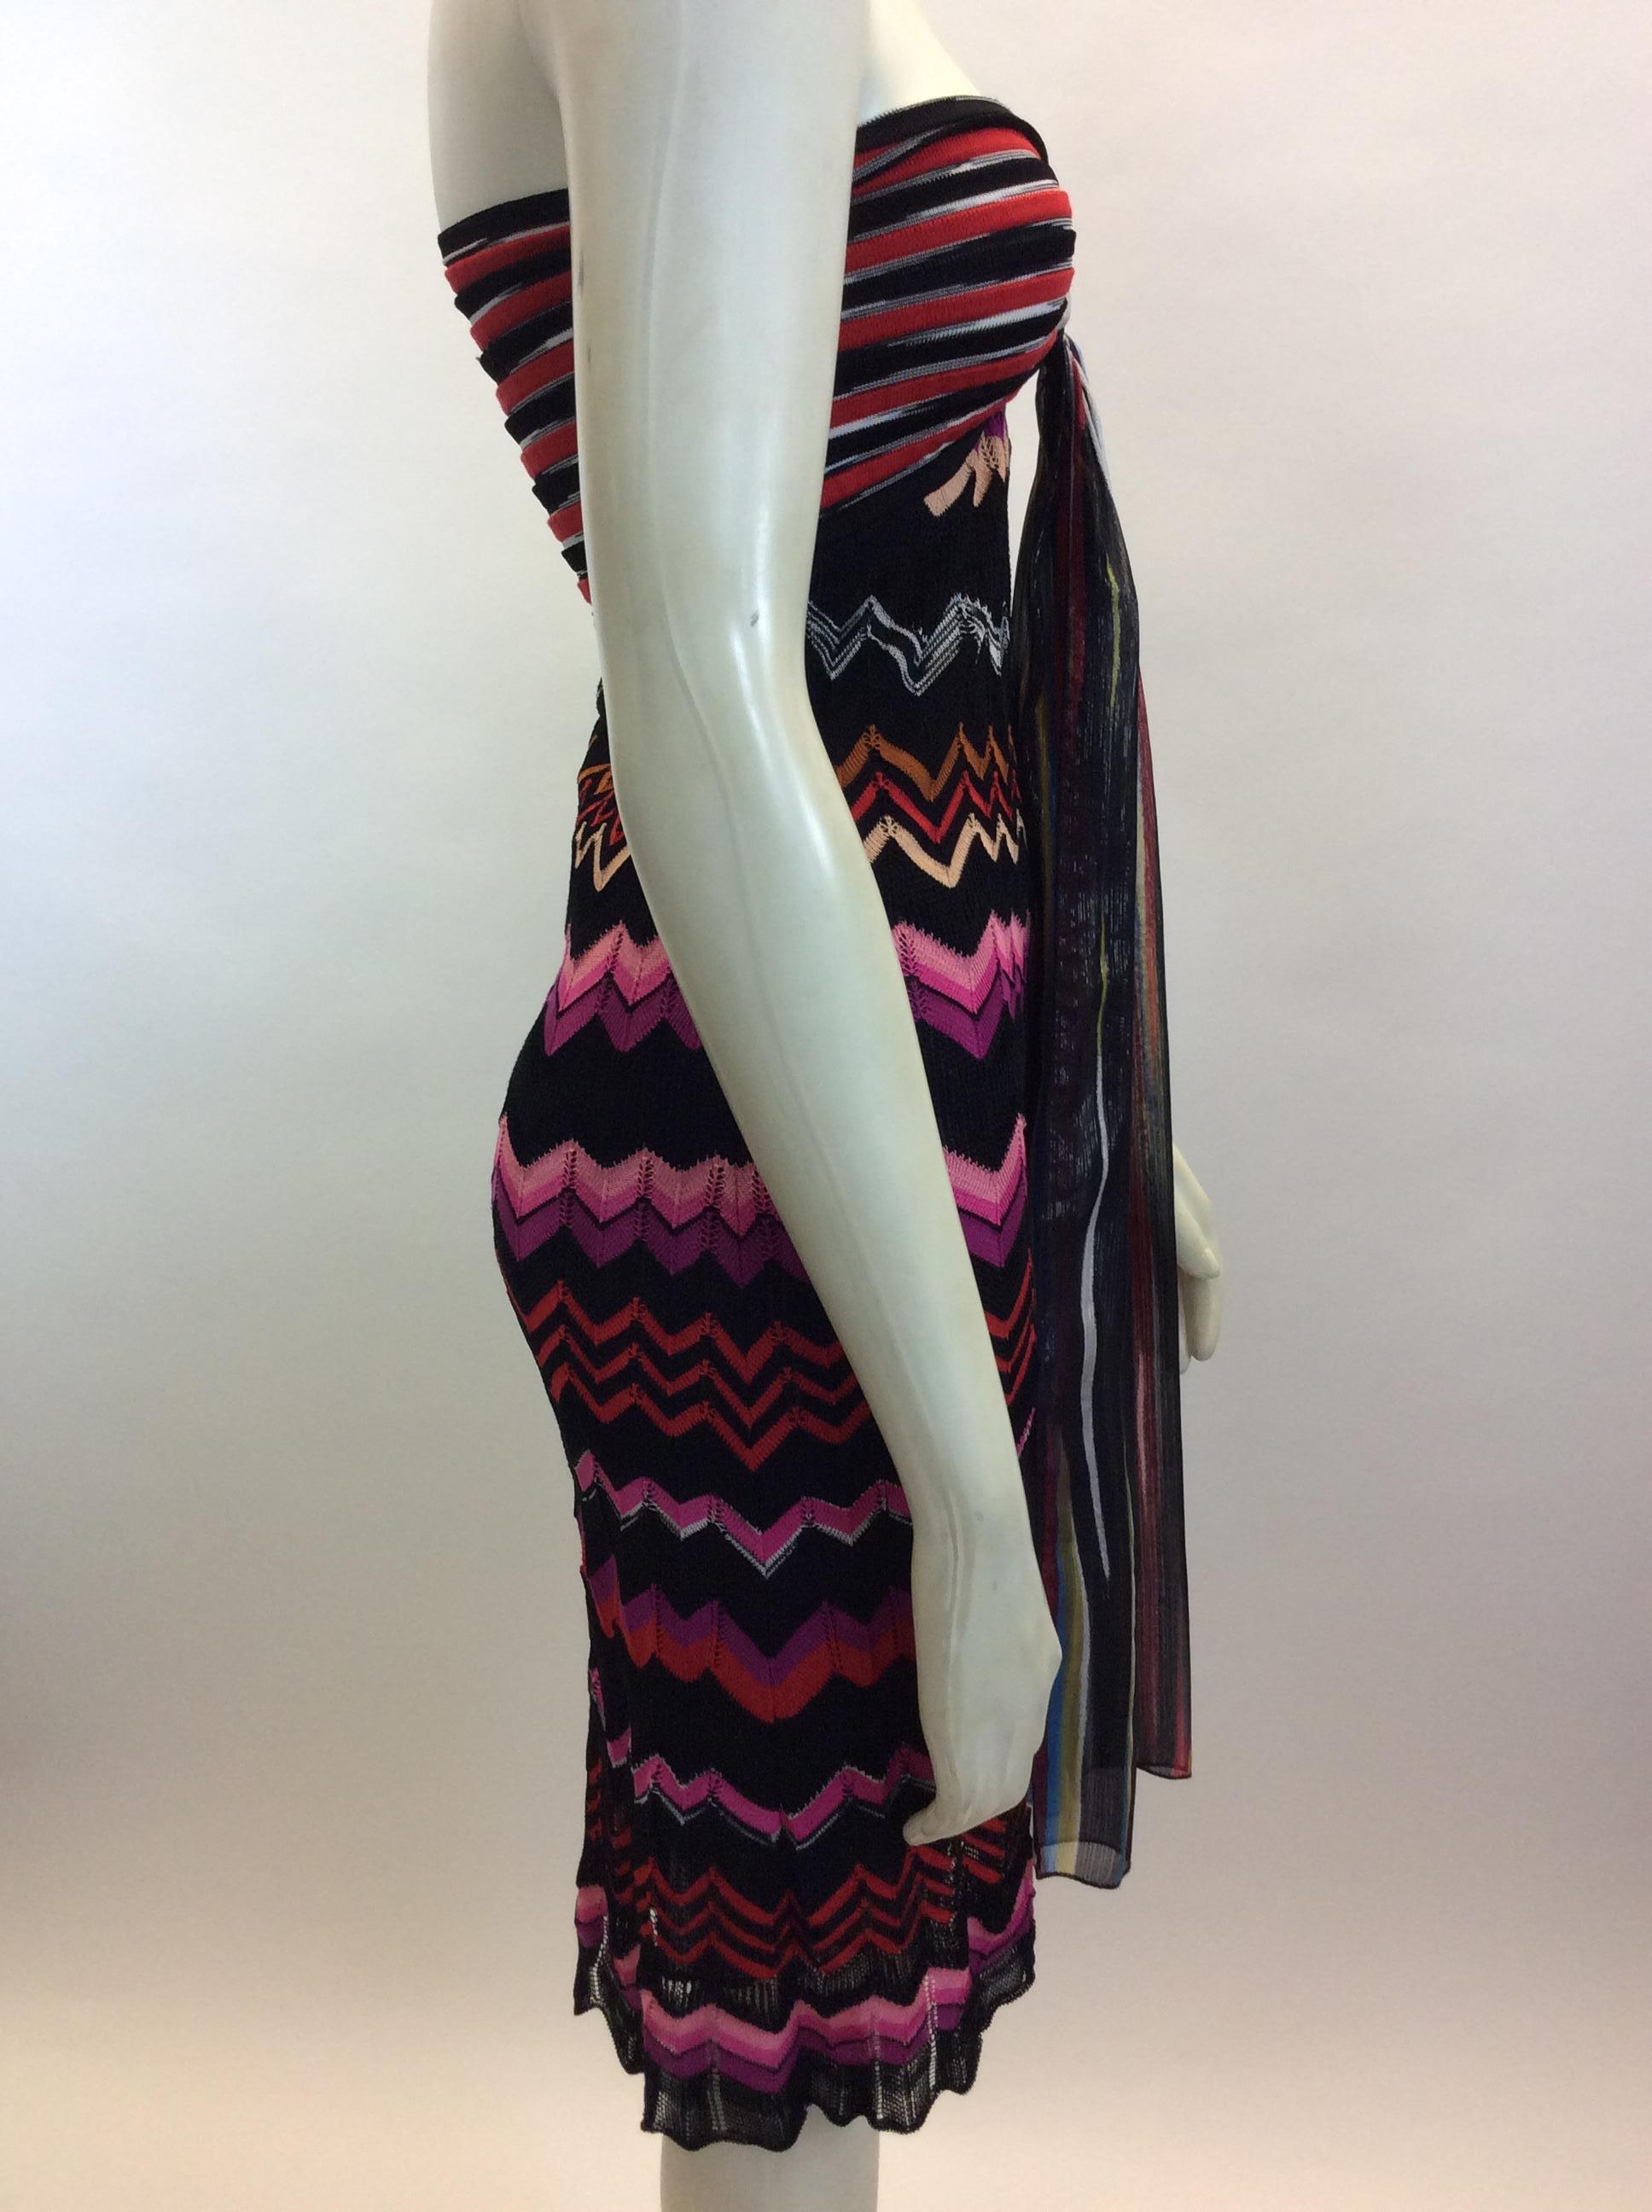 Missoni Multi-Color Striped Strapless Dress In Excellent Condition For Sale In Narberth, PA